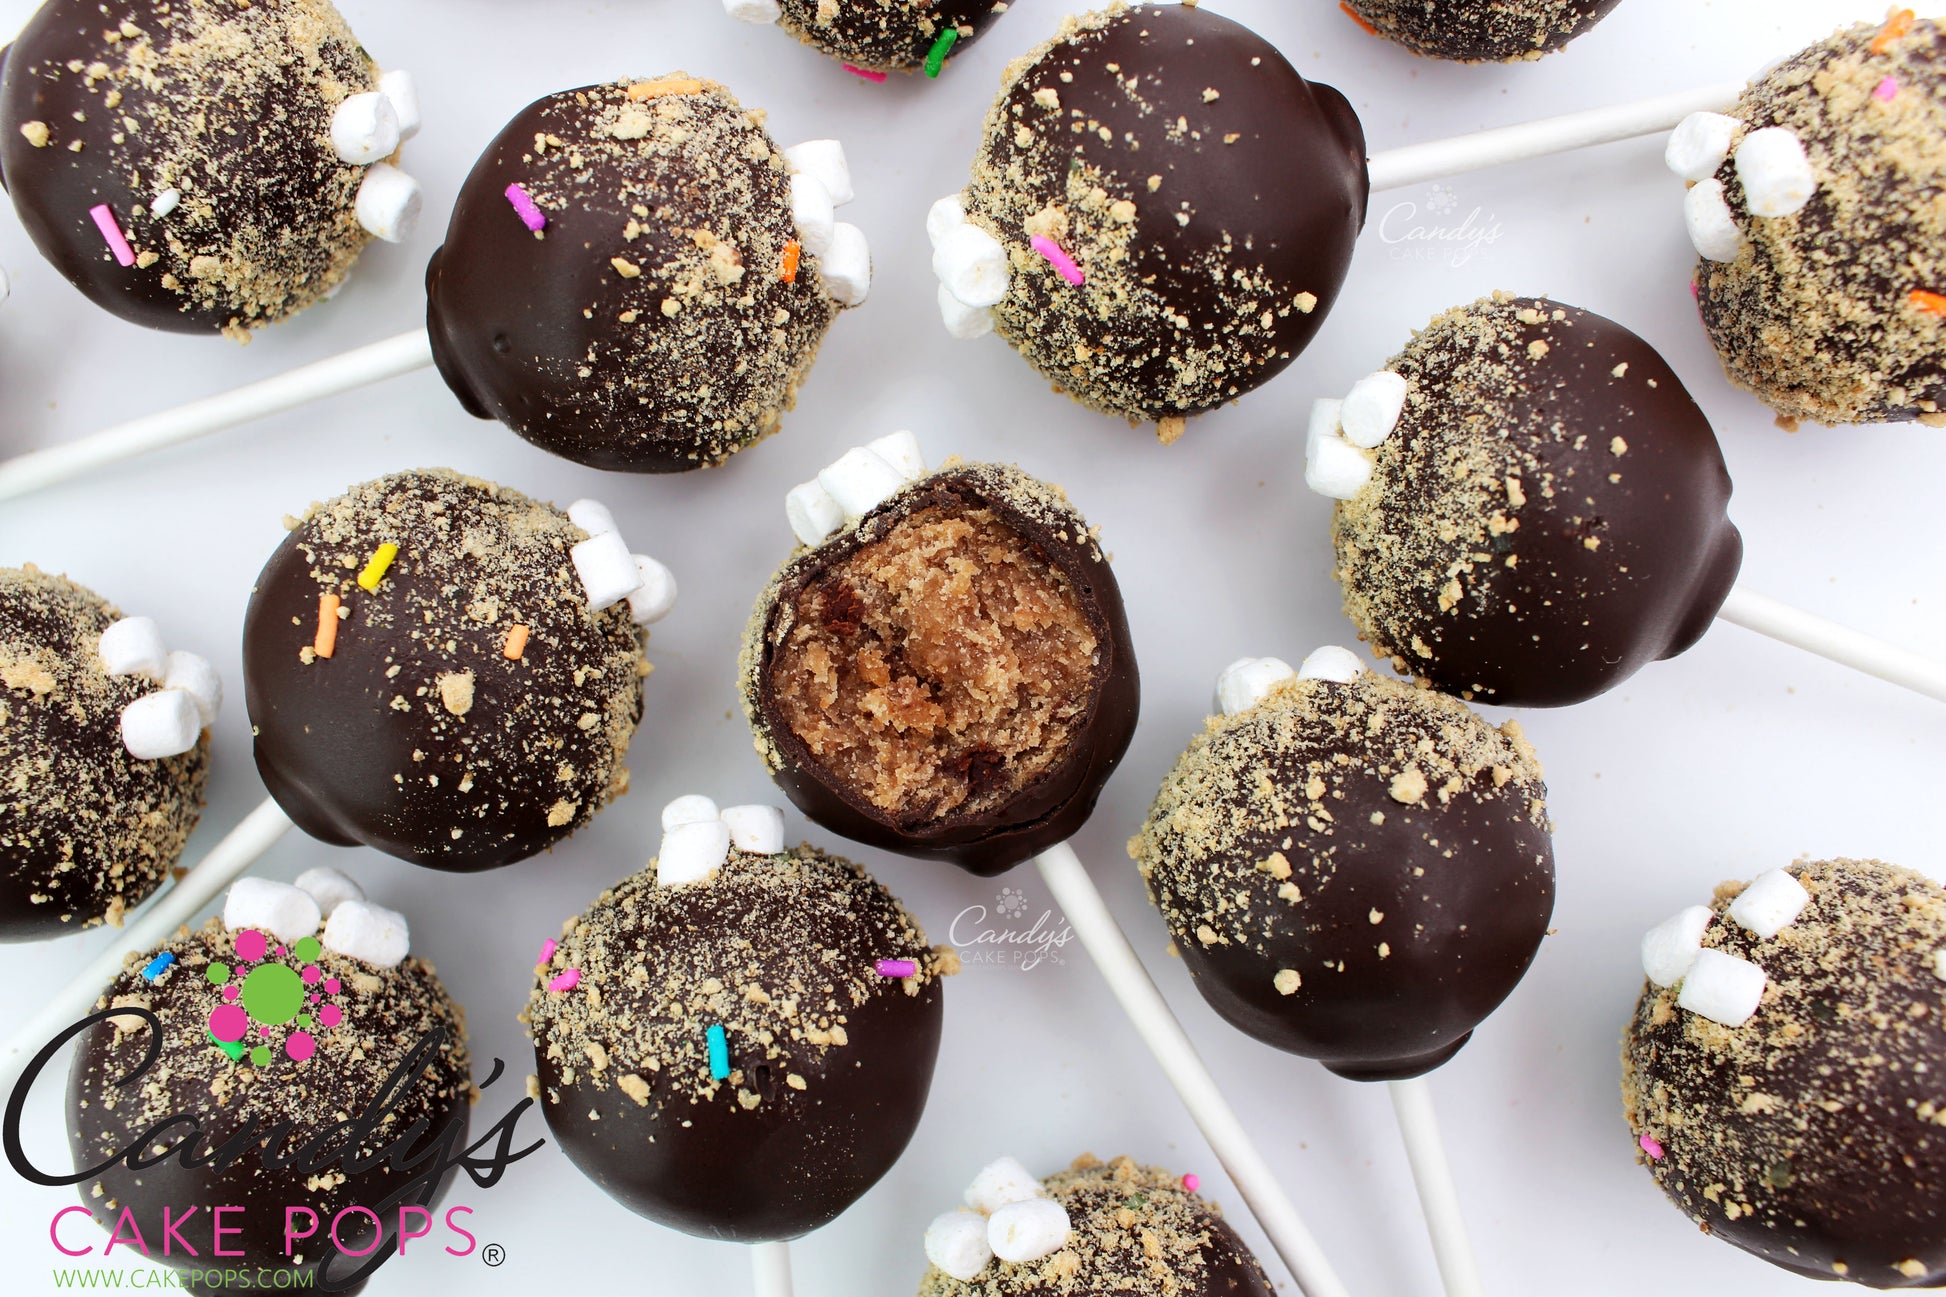 S'mores Cake Pop Box - Candy's Cake Pops